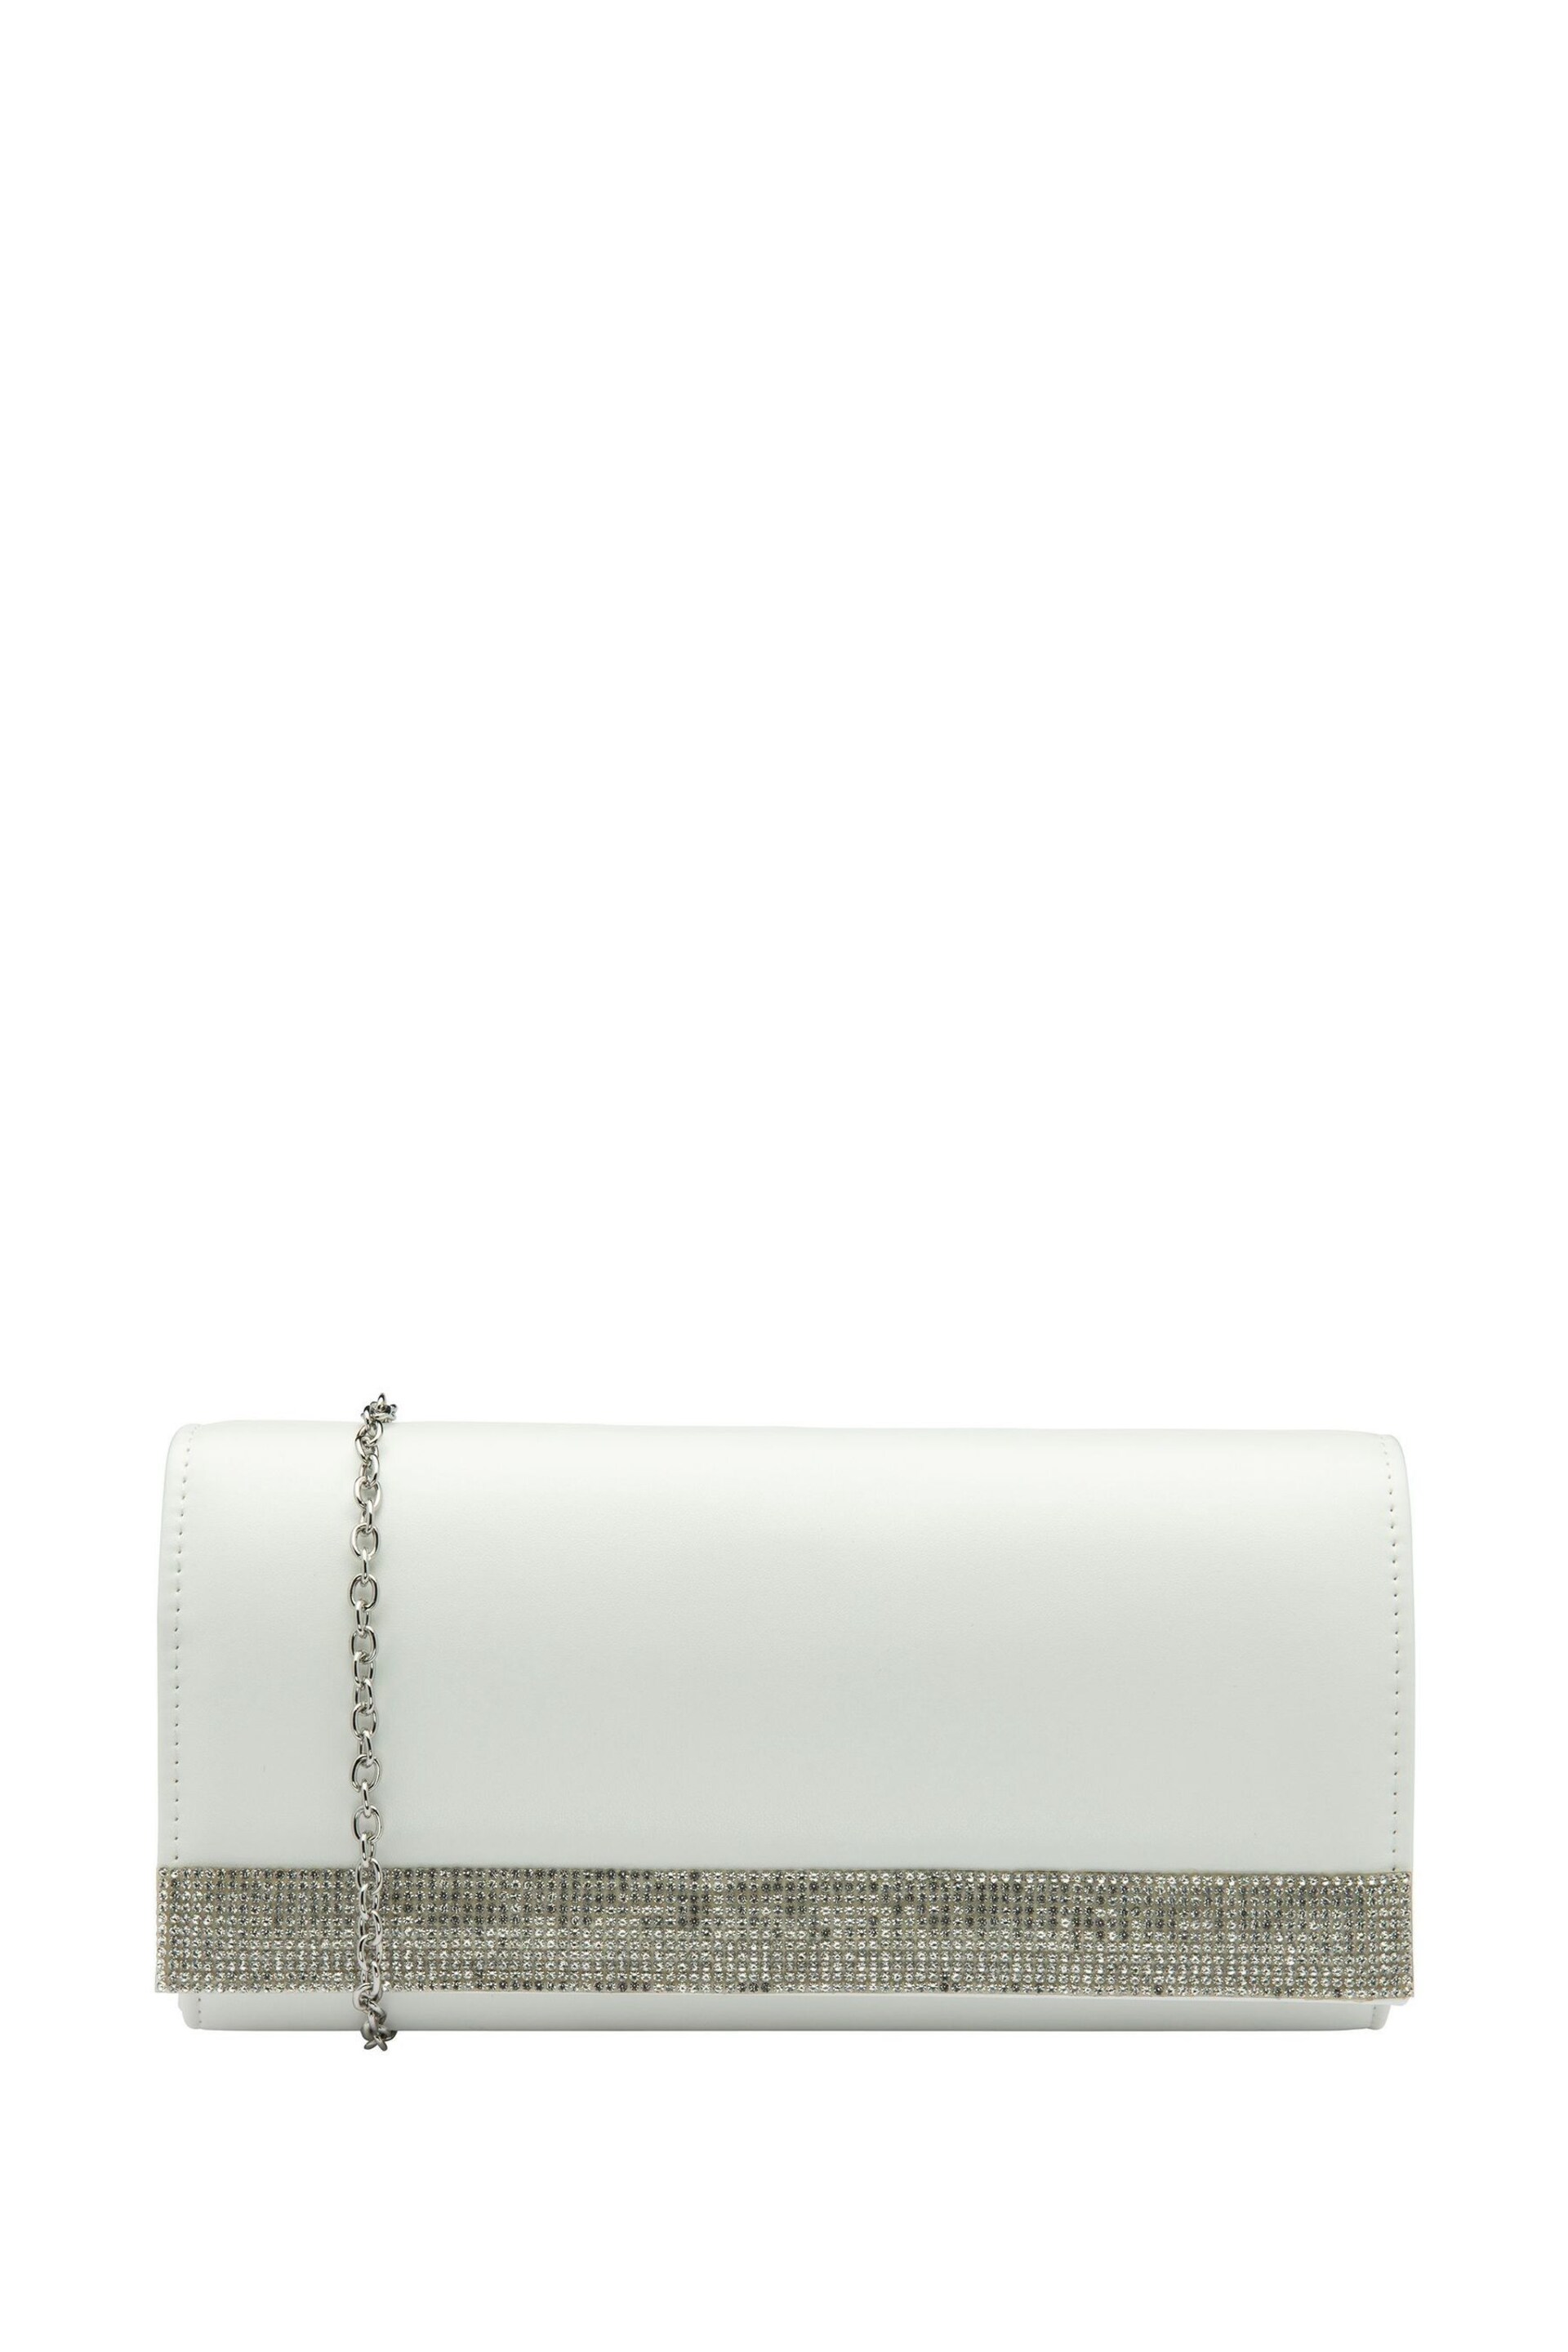 Lotus White Clutch Bag With Chain - Image 1 of 4